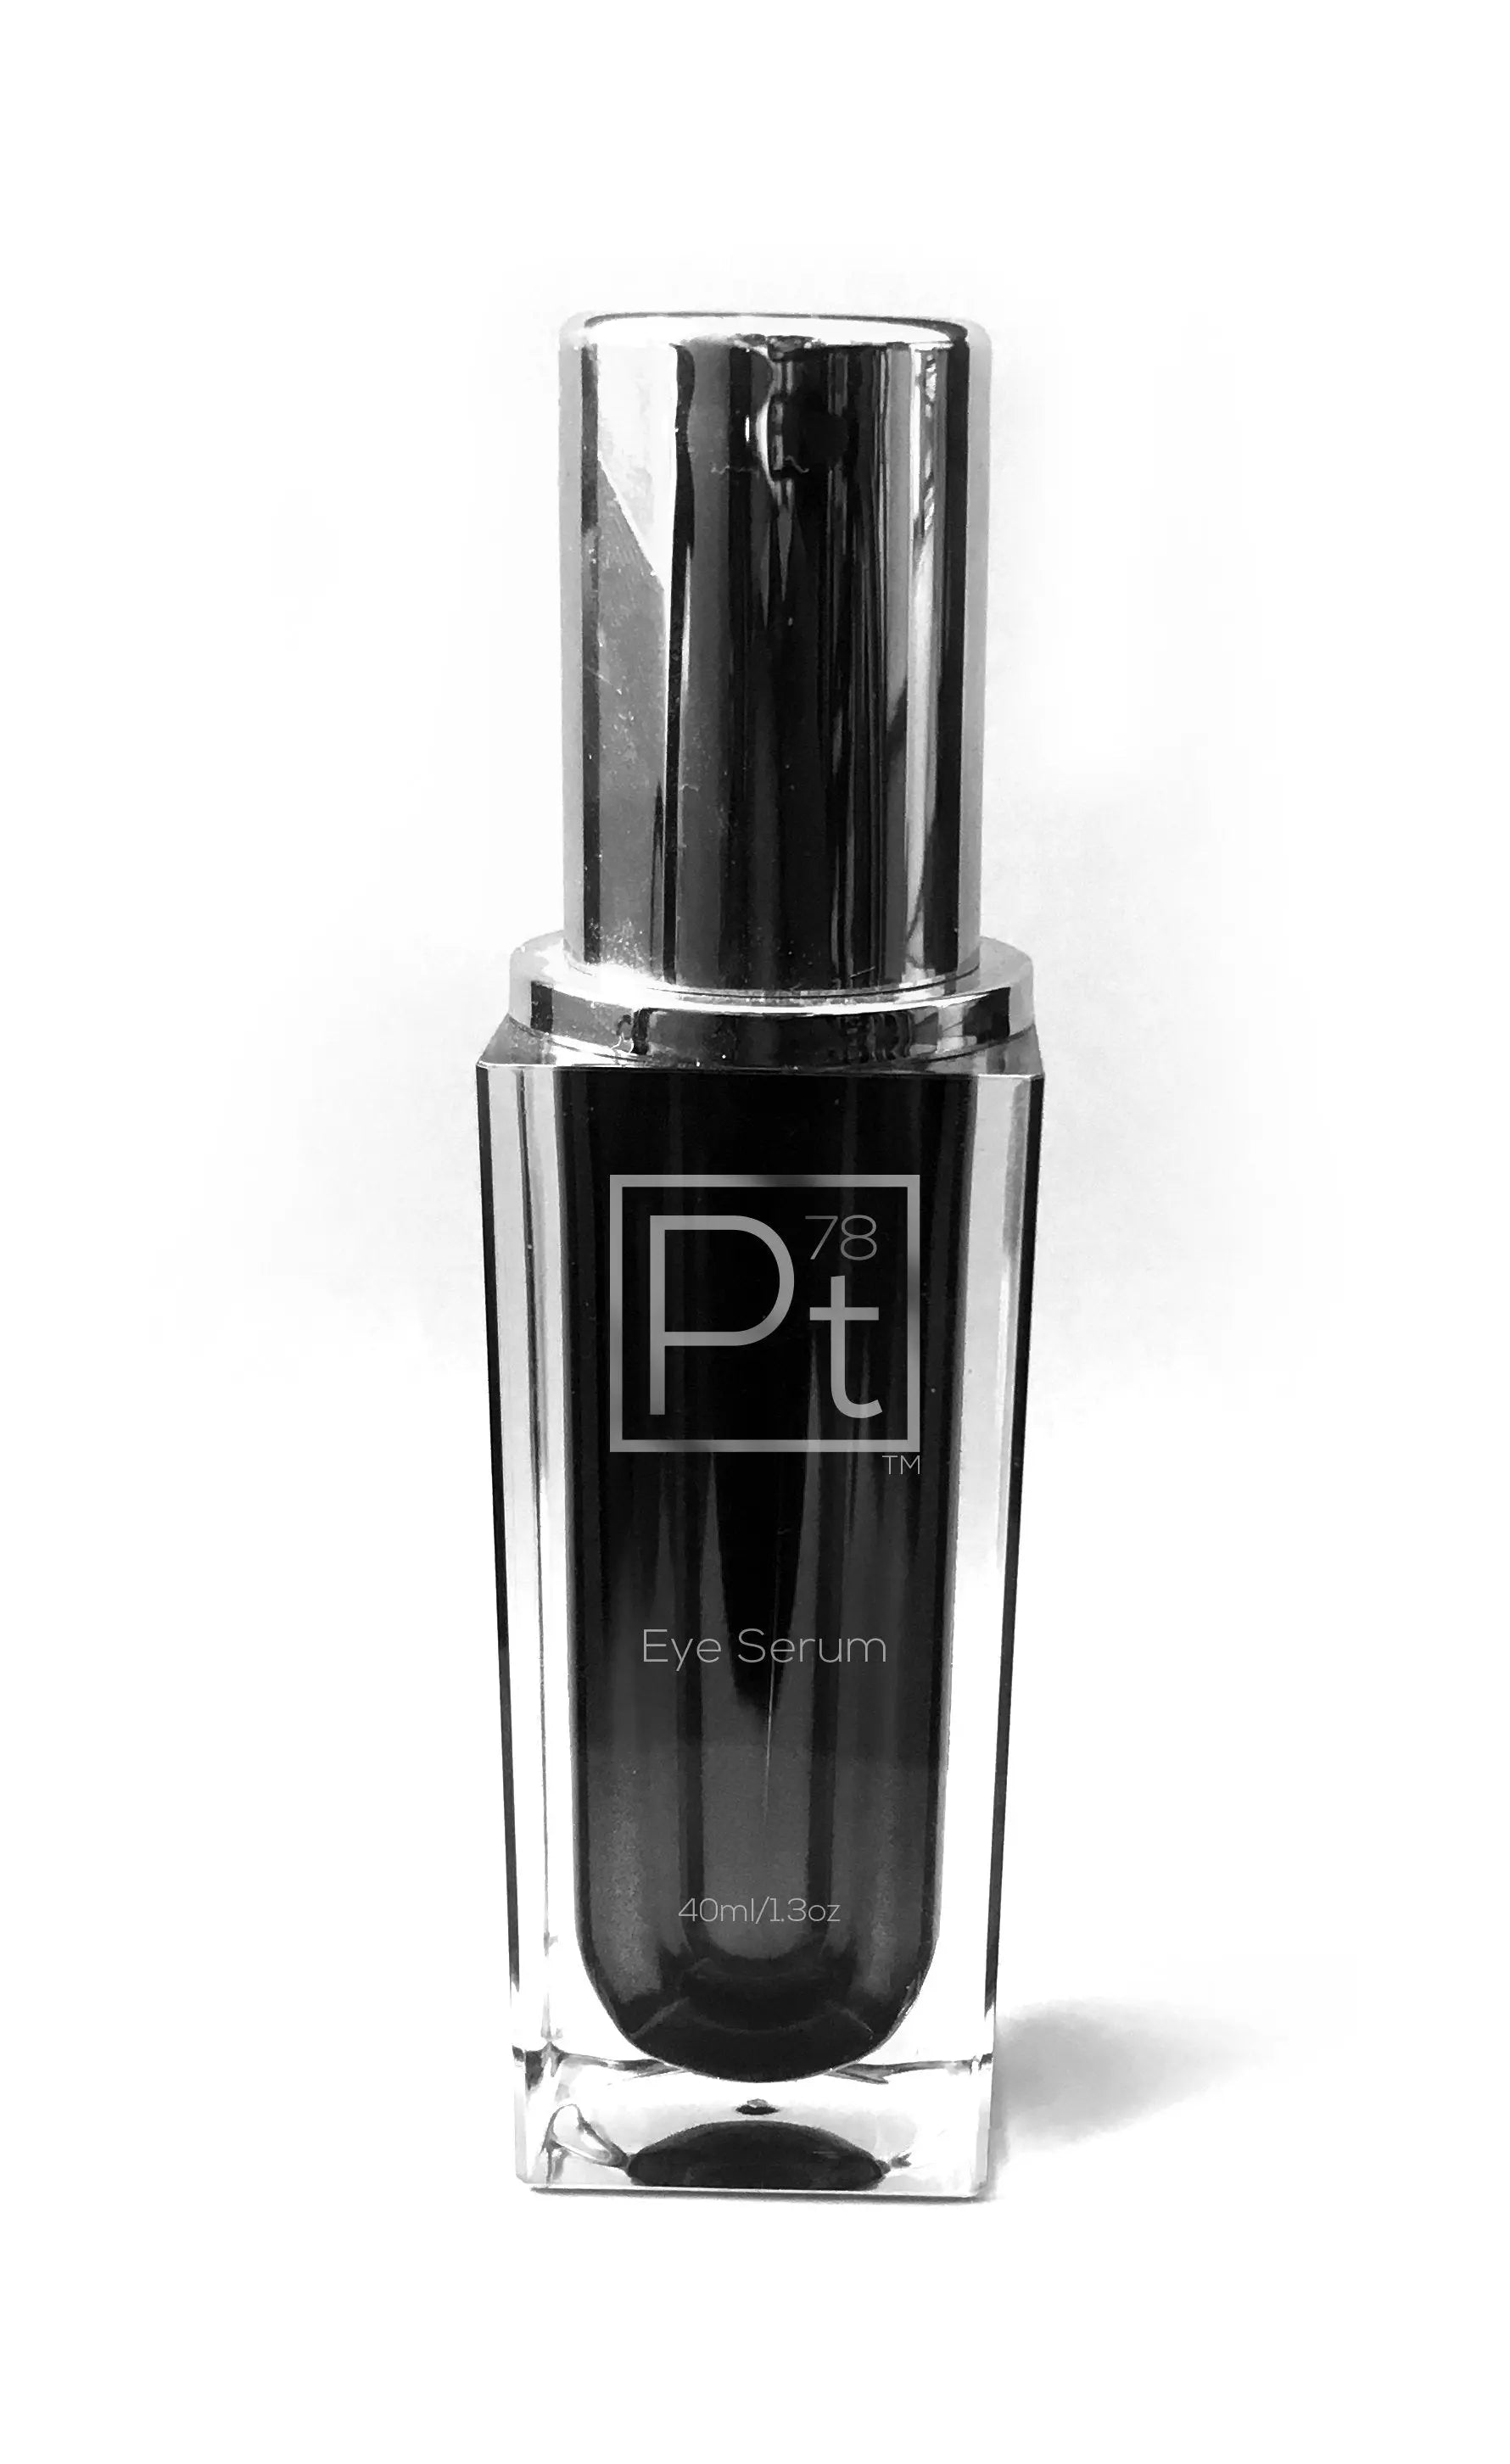 Specialists Demystify 2021s Optimal Face Serums Platinum Delux ®